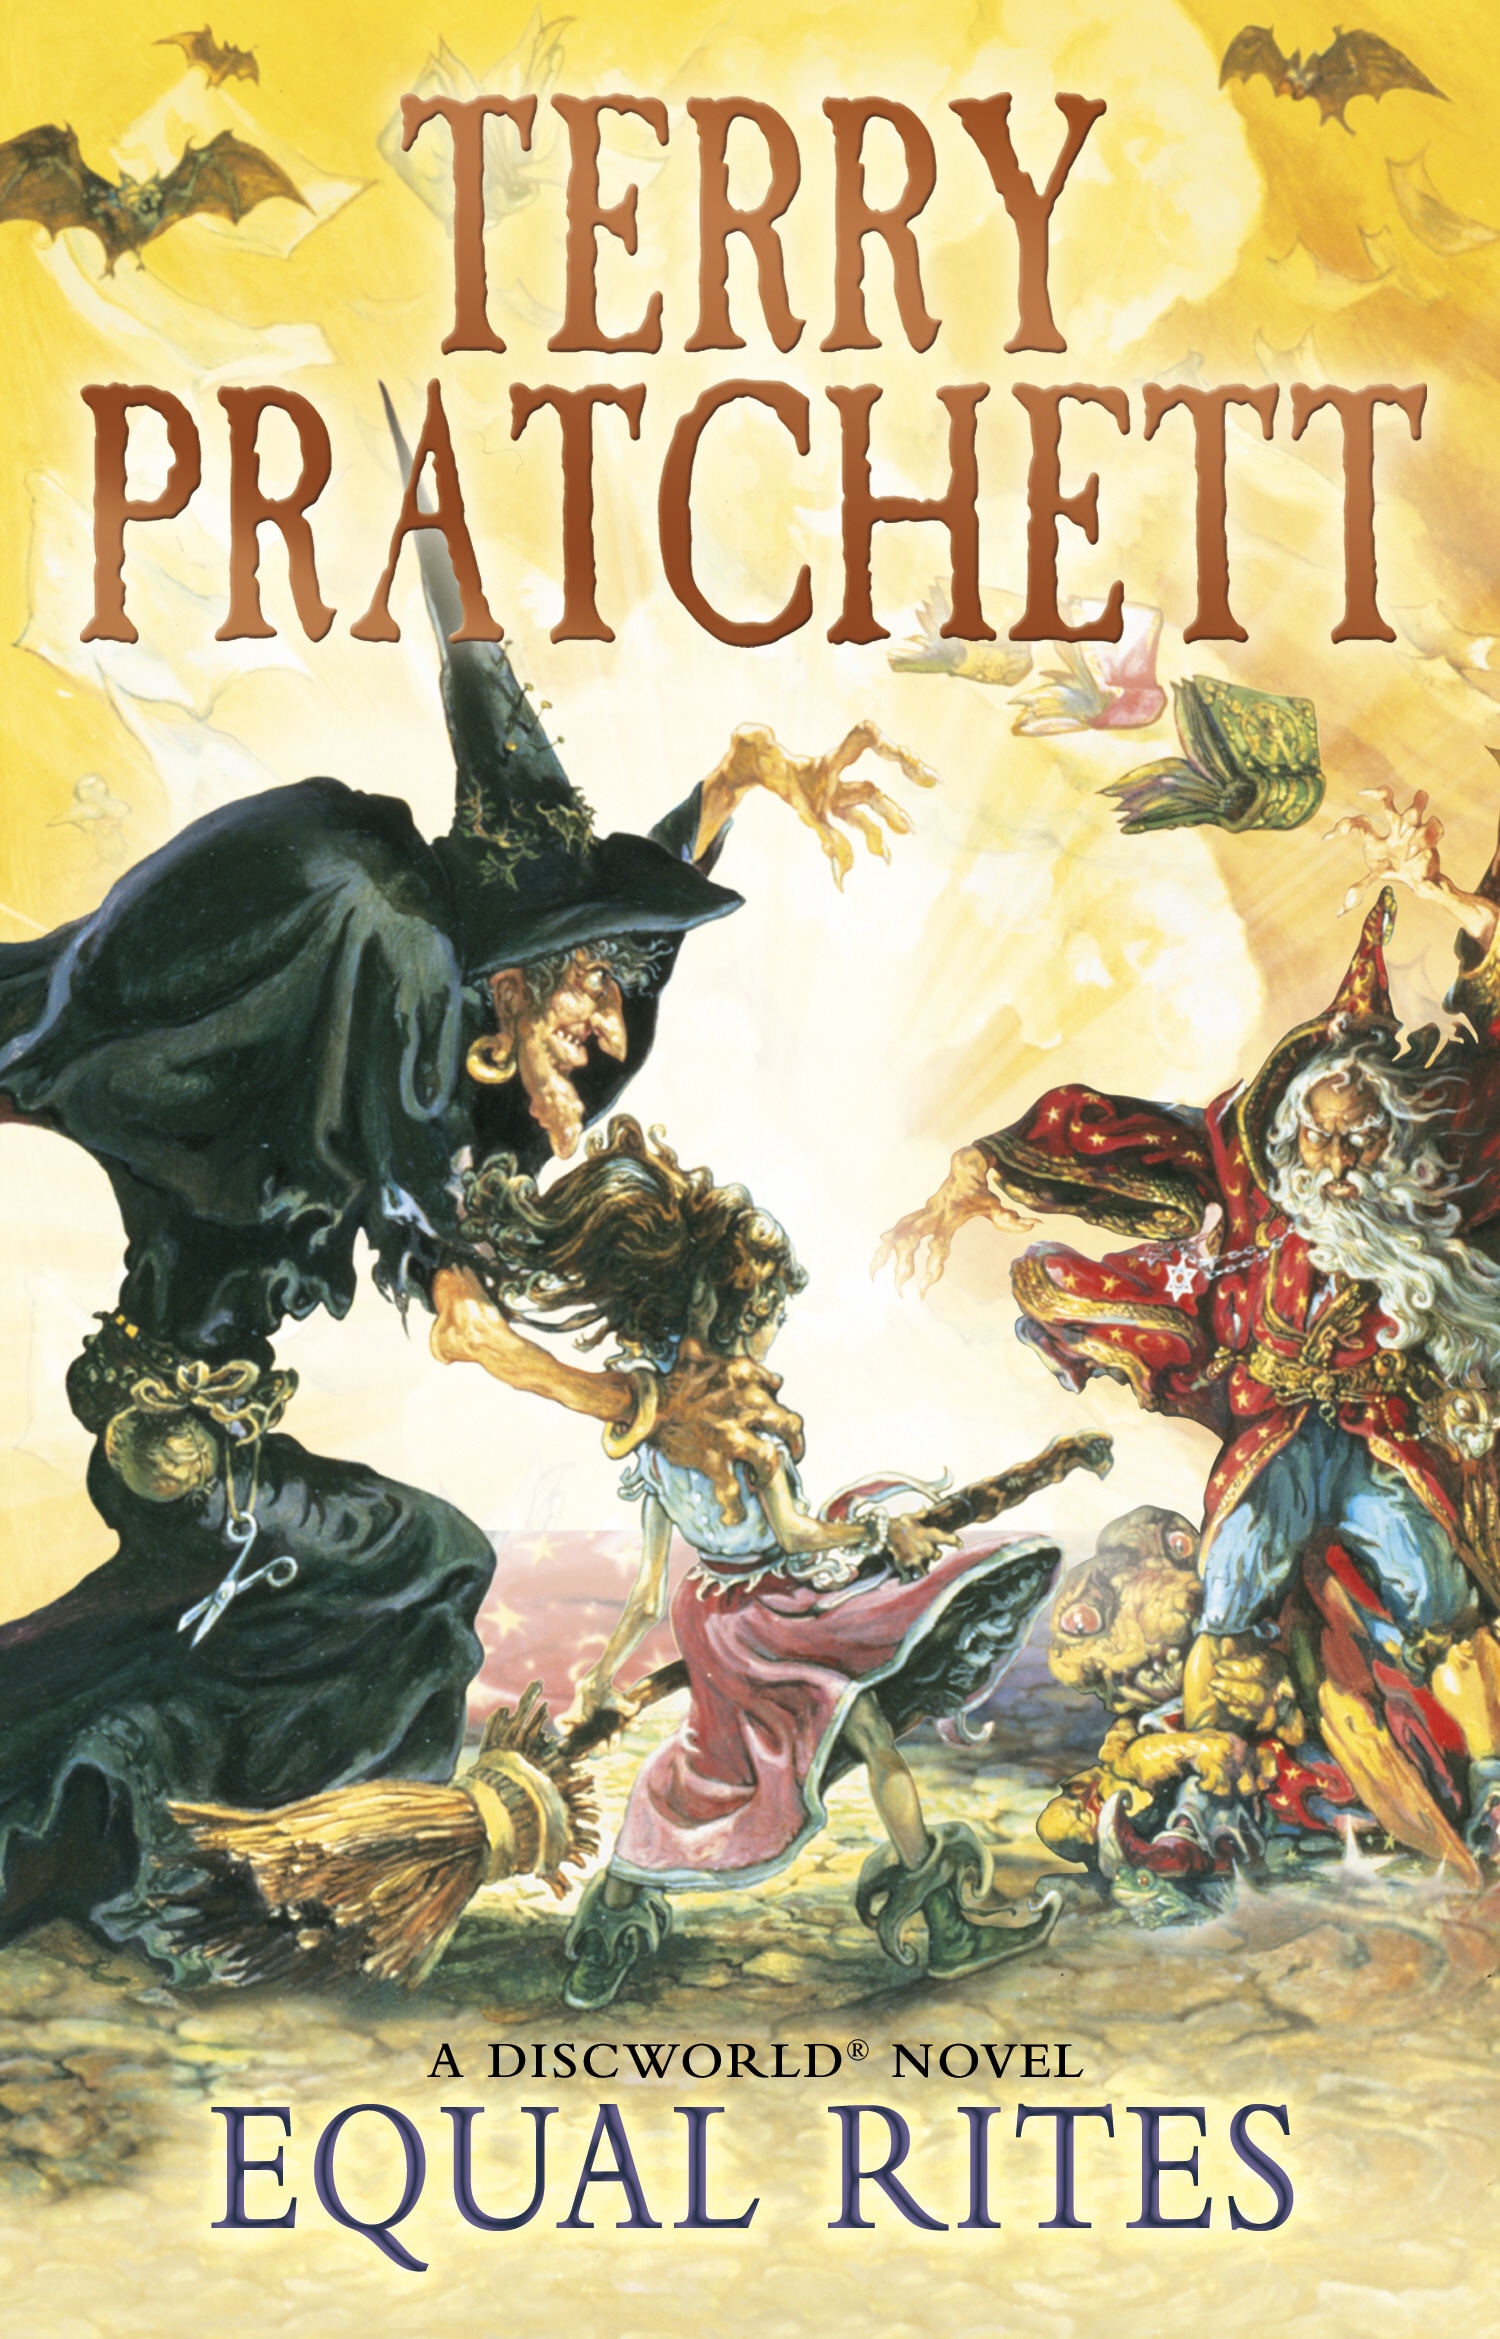 Book “Equal Rites” by Terry Pratchett — June 21, 2012